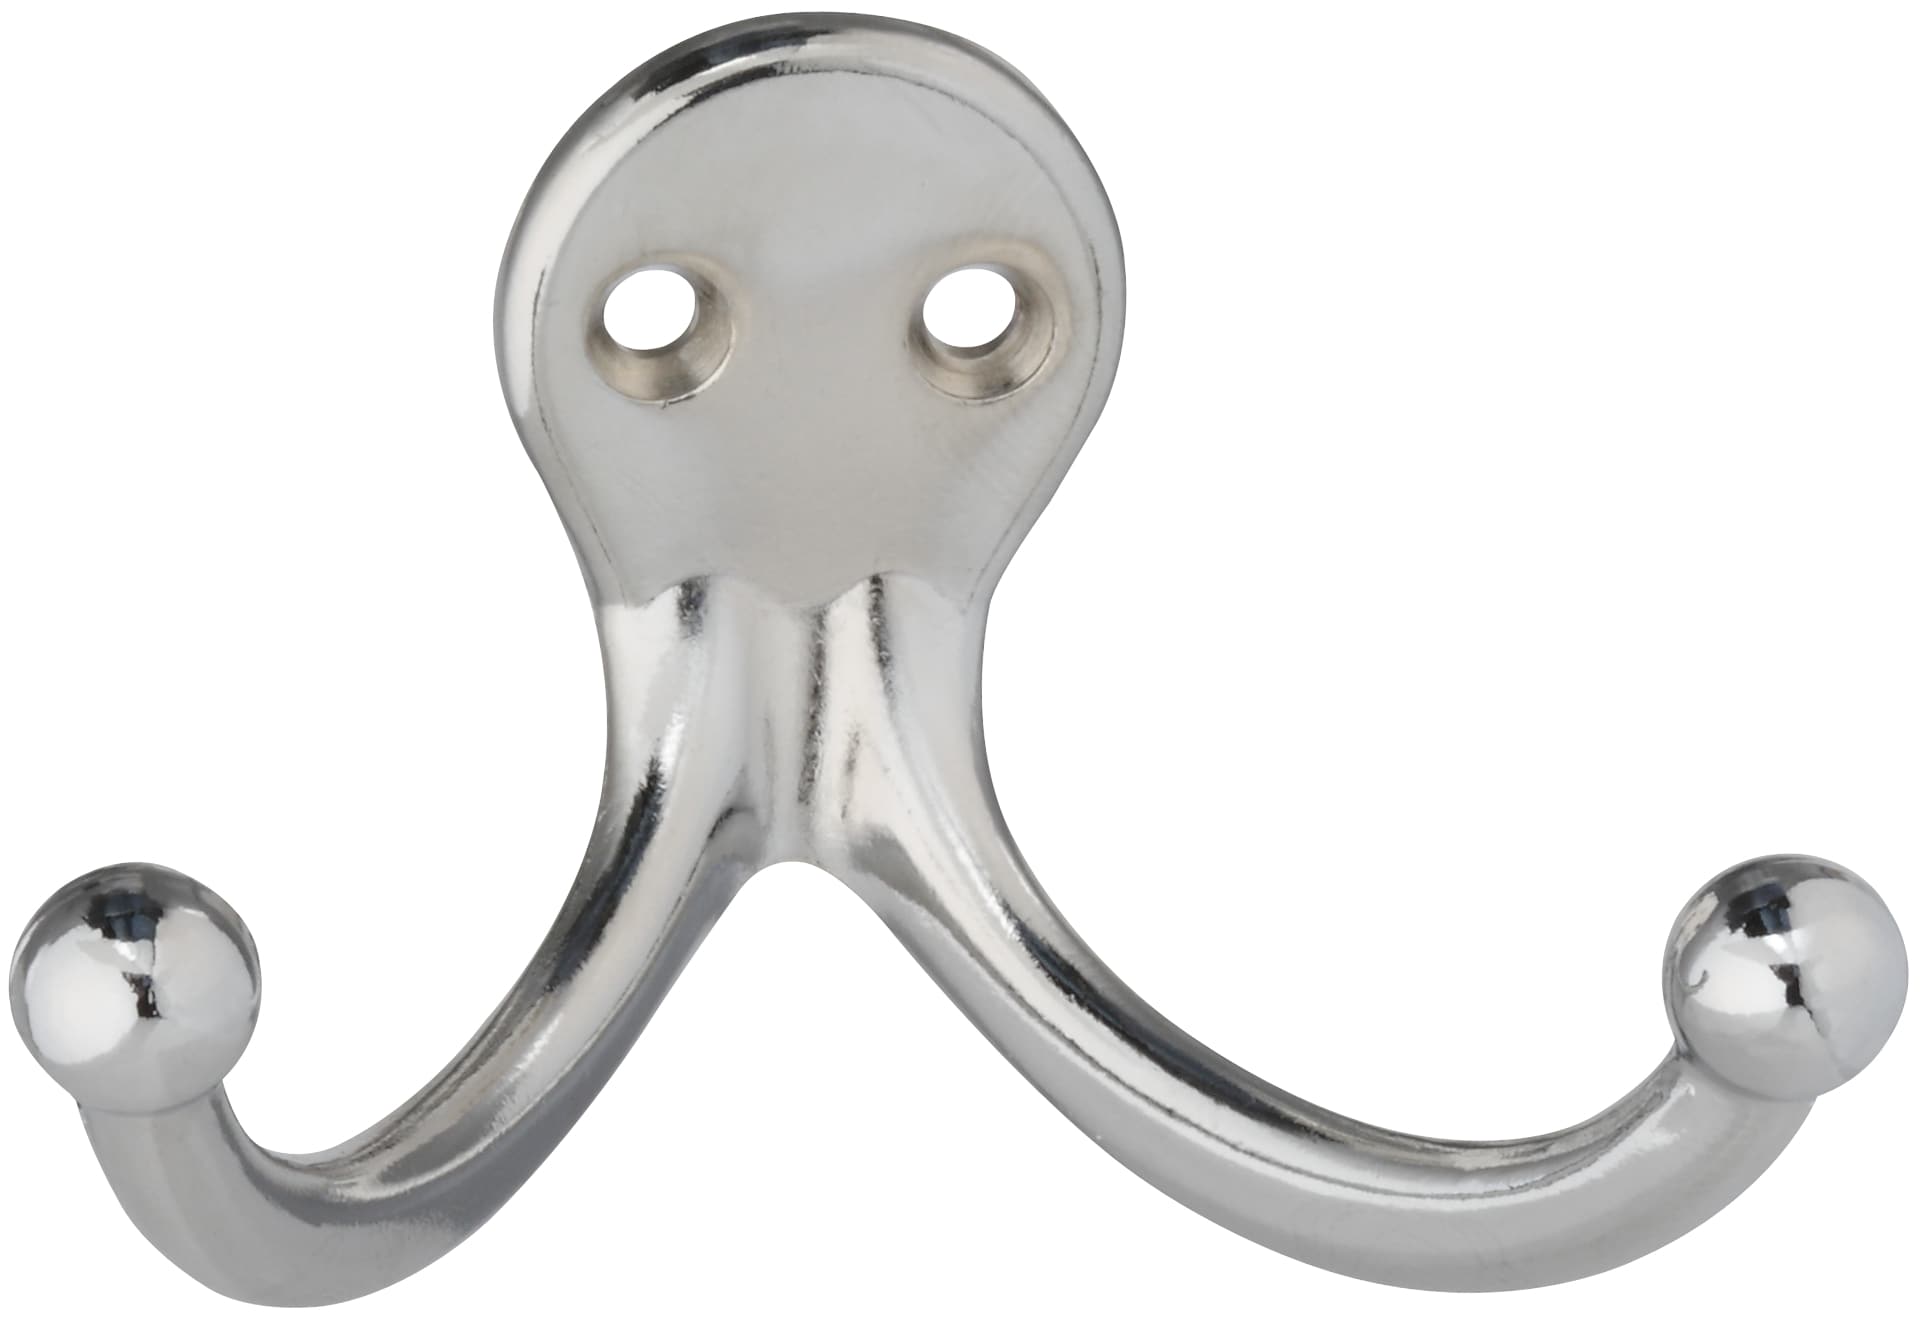 Key Holder for Wall, Octopus Coat Hooks Wall Mounted Towel Hooks, Heavy  Duty Wall Hooks Decorative with 6 arms